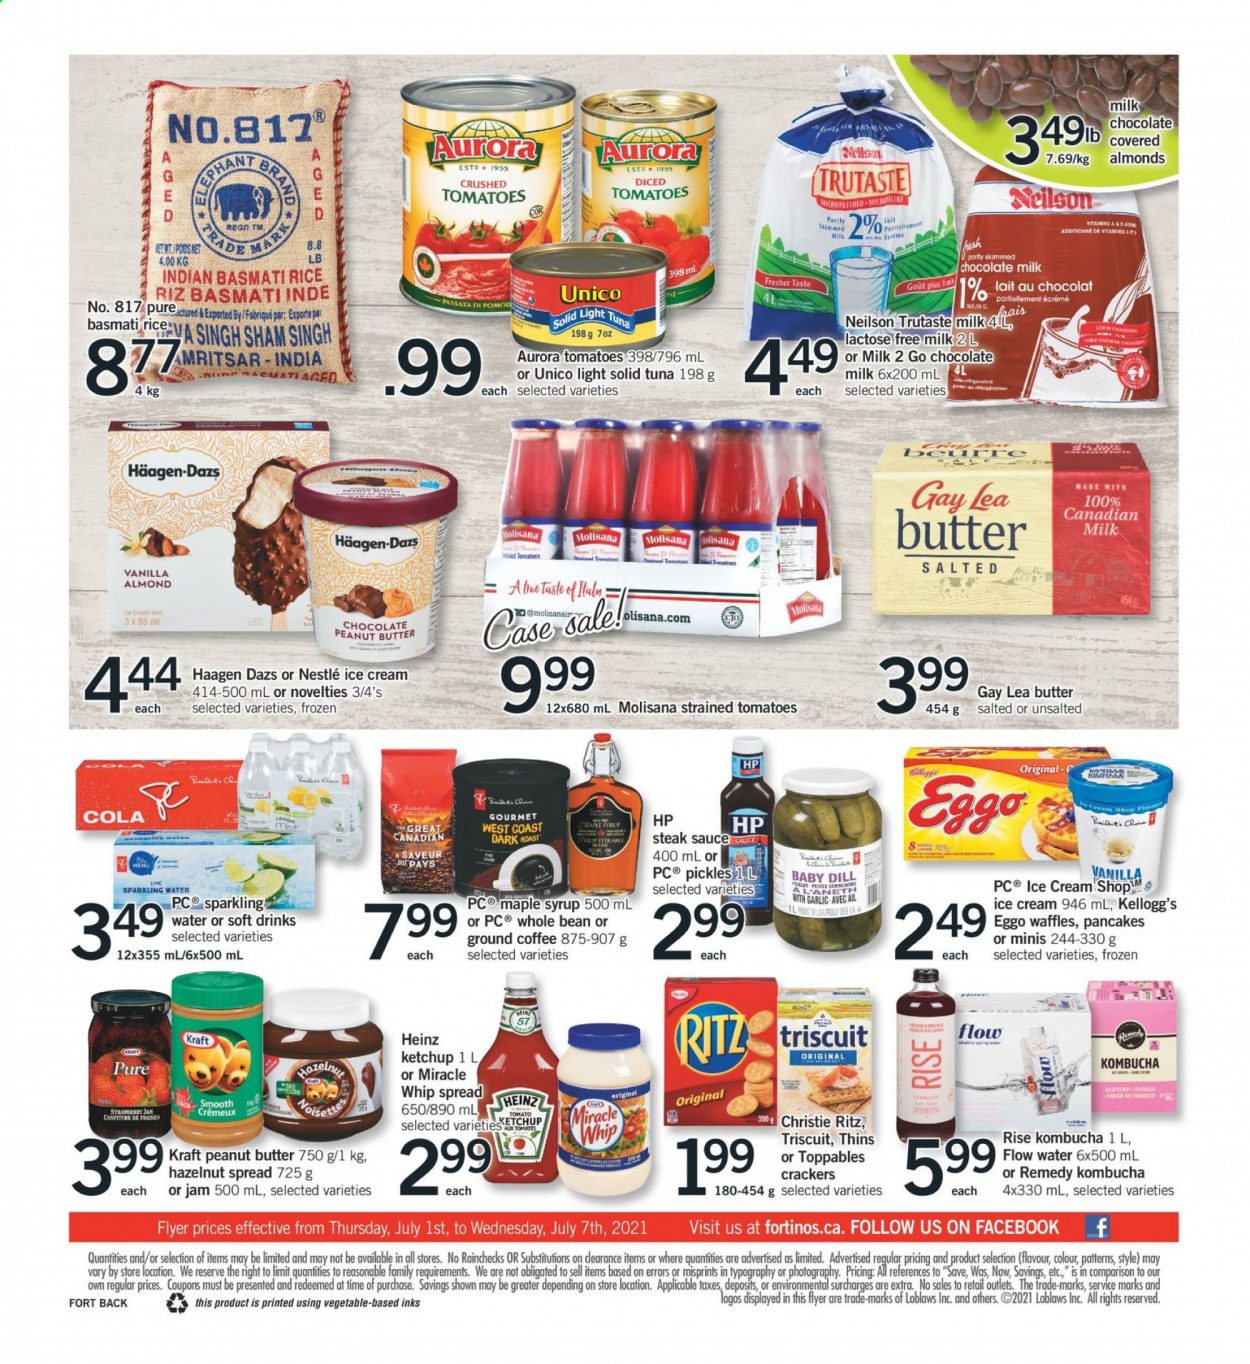 thumbnail - Fortinos Flyer - July 01, 2021 - July 07, 2021 - Sales products - Hewlett Packard, waffles, tomatoes, tuna, sauce, Kraft®, lactose free milk, Miracle Whip, ice cream, Häagen-Dazs, milk chocolate, crackers, Kellogg's, RITZ, Thins, Heinz, pickles, light tuna, basmati rice, rice, dill, steak sauce, maple syrup, fruit jam, peanut butter, syrup, hazelnut spread, almonds, soft drink, flavored water, sparkling water, kombucha, coffee, ground coffee, L'Or, Nestlé, steak. Page 2.